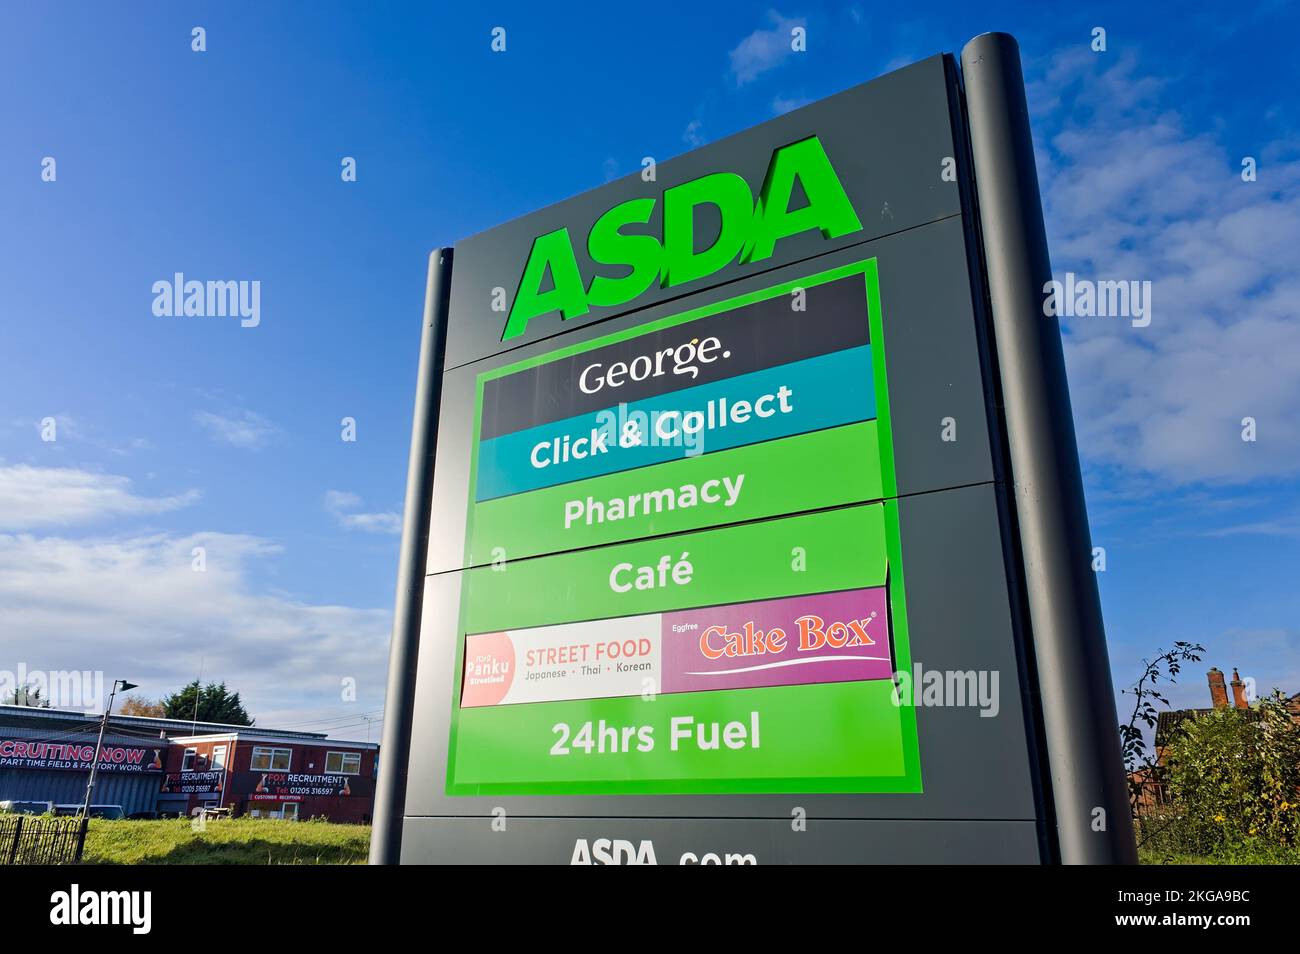 looking up at the billboard brand sign for the ASDA superstore with a blue sky background Stock Photo